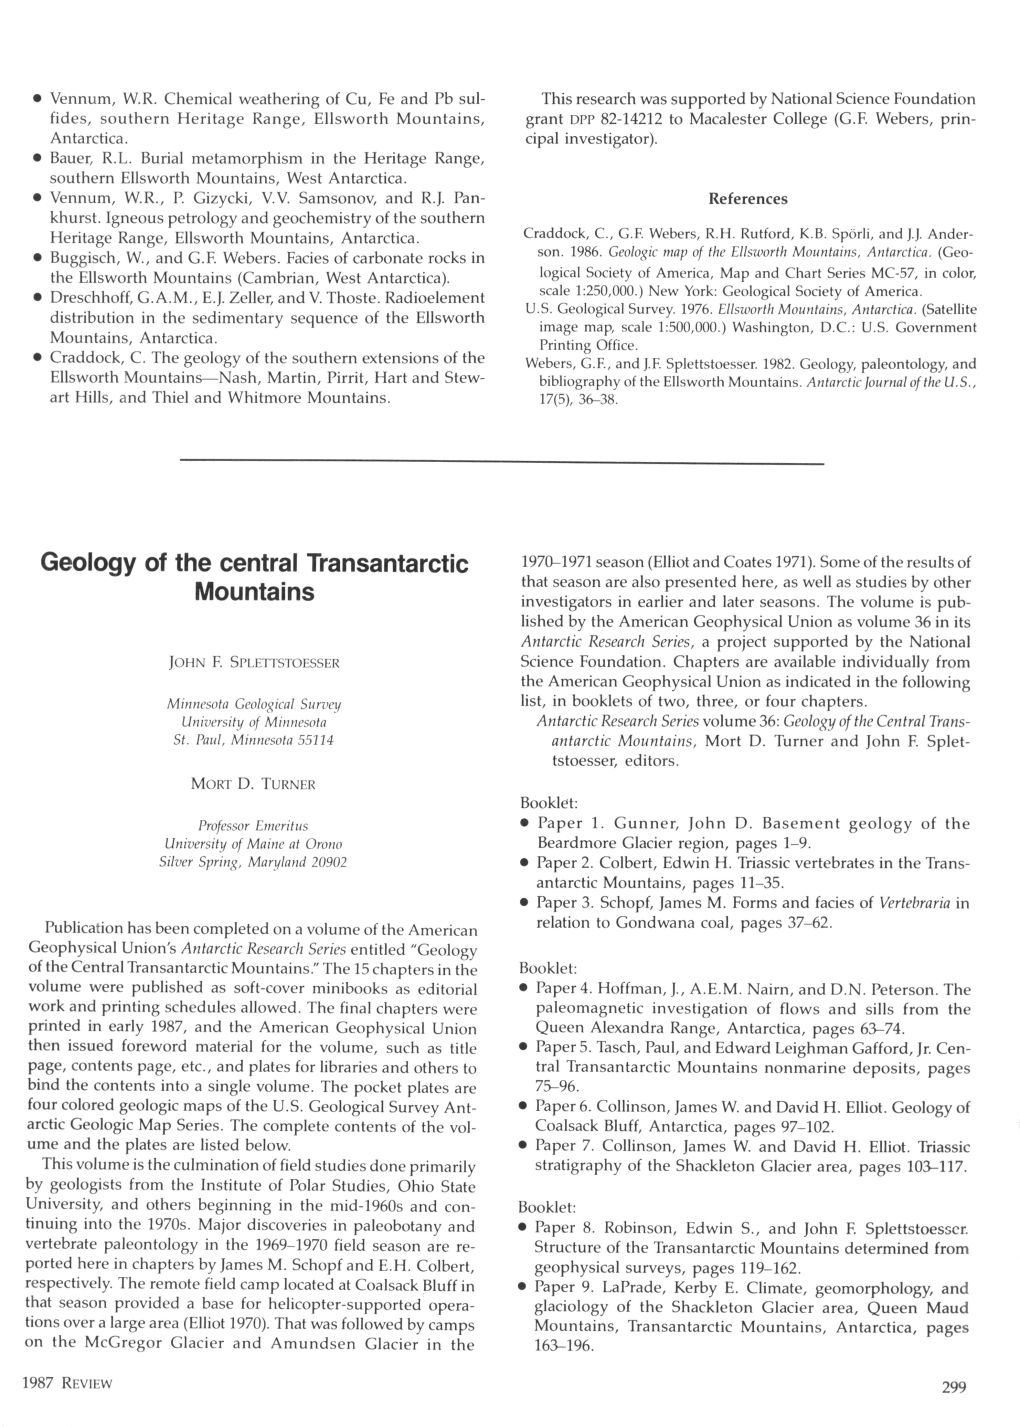 Geology of the Central Transantarctic Mountains." the 15 Chapters in the Booklet: Volume Were Published As Soft-Cover Minibooks As Editorial • Paper 4